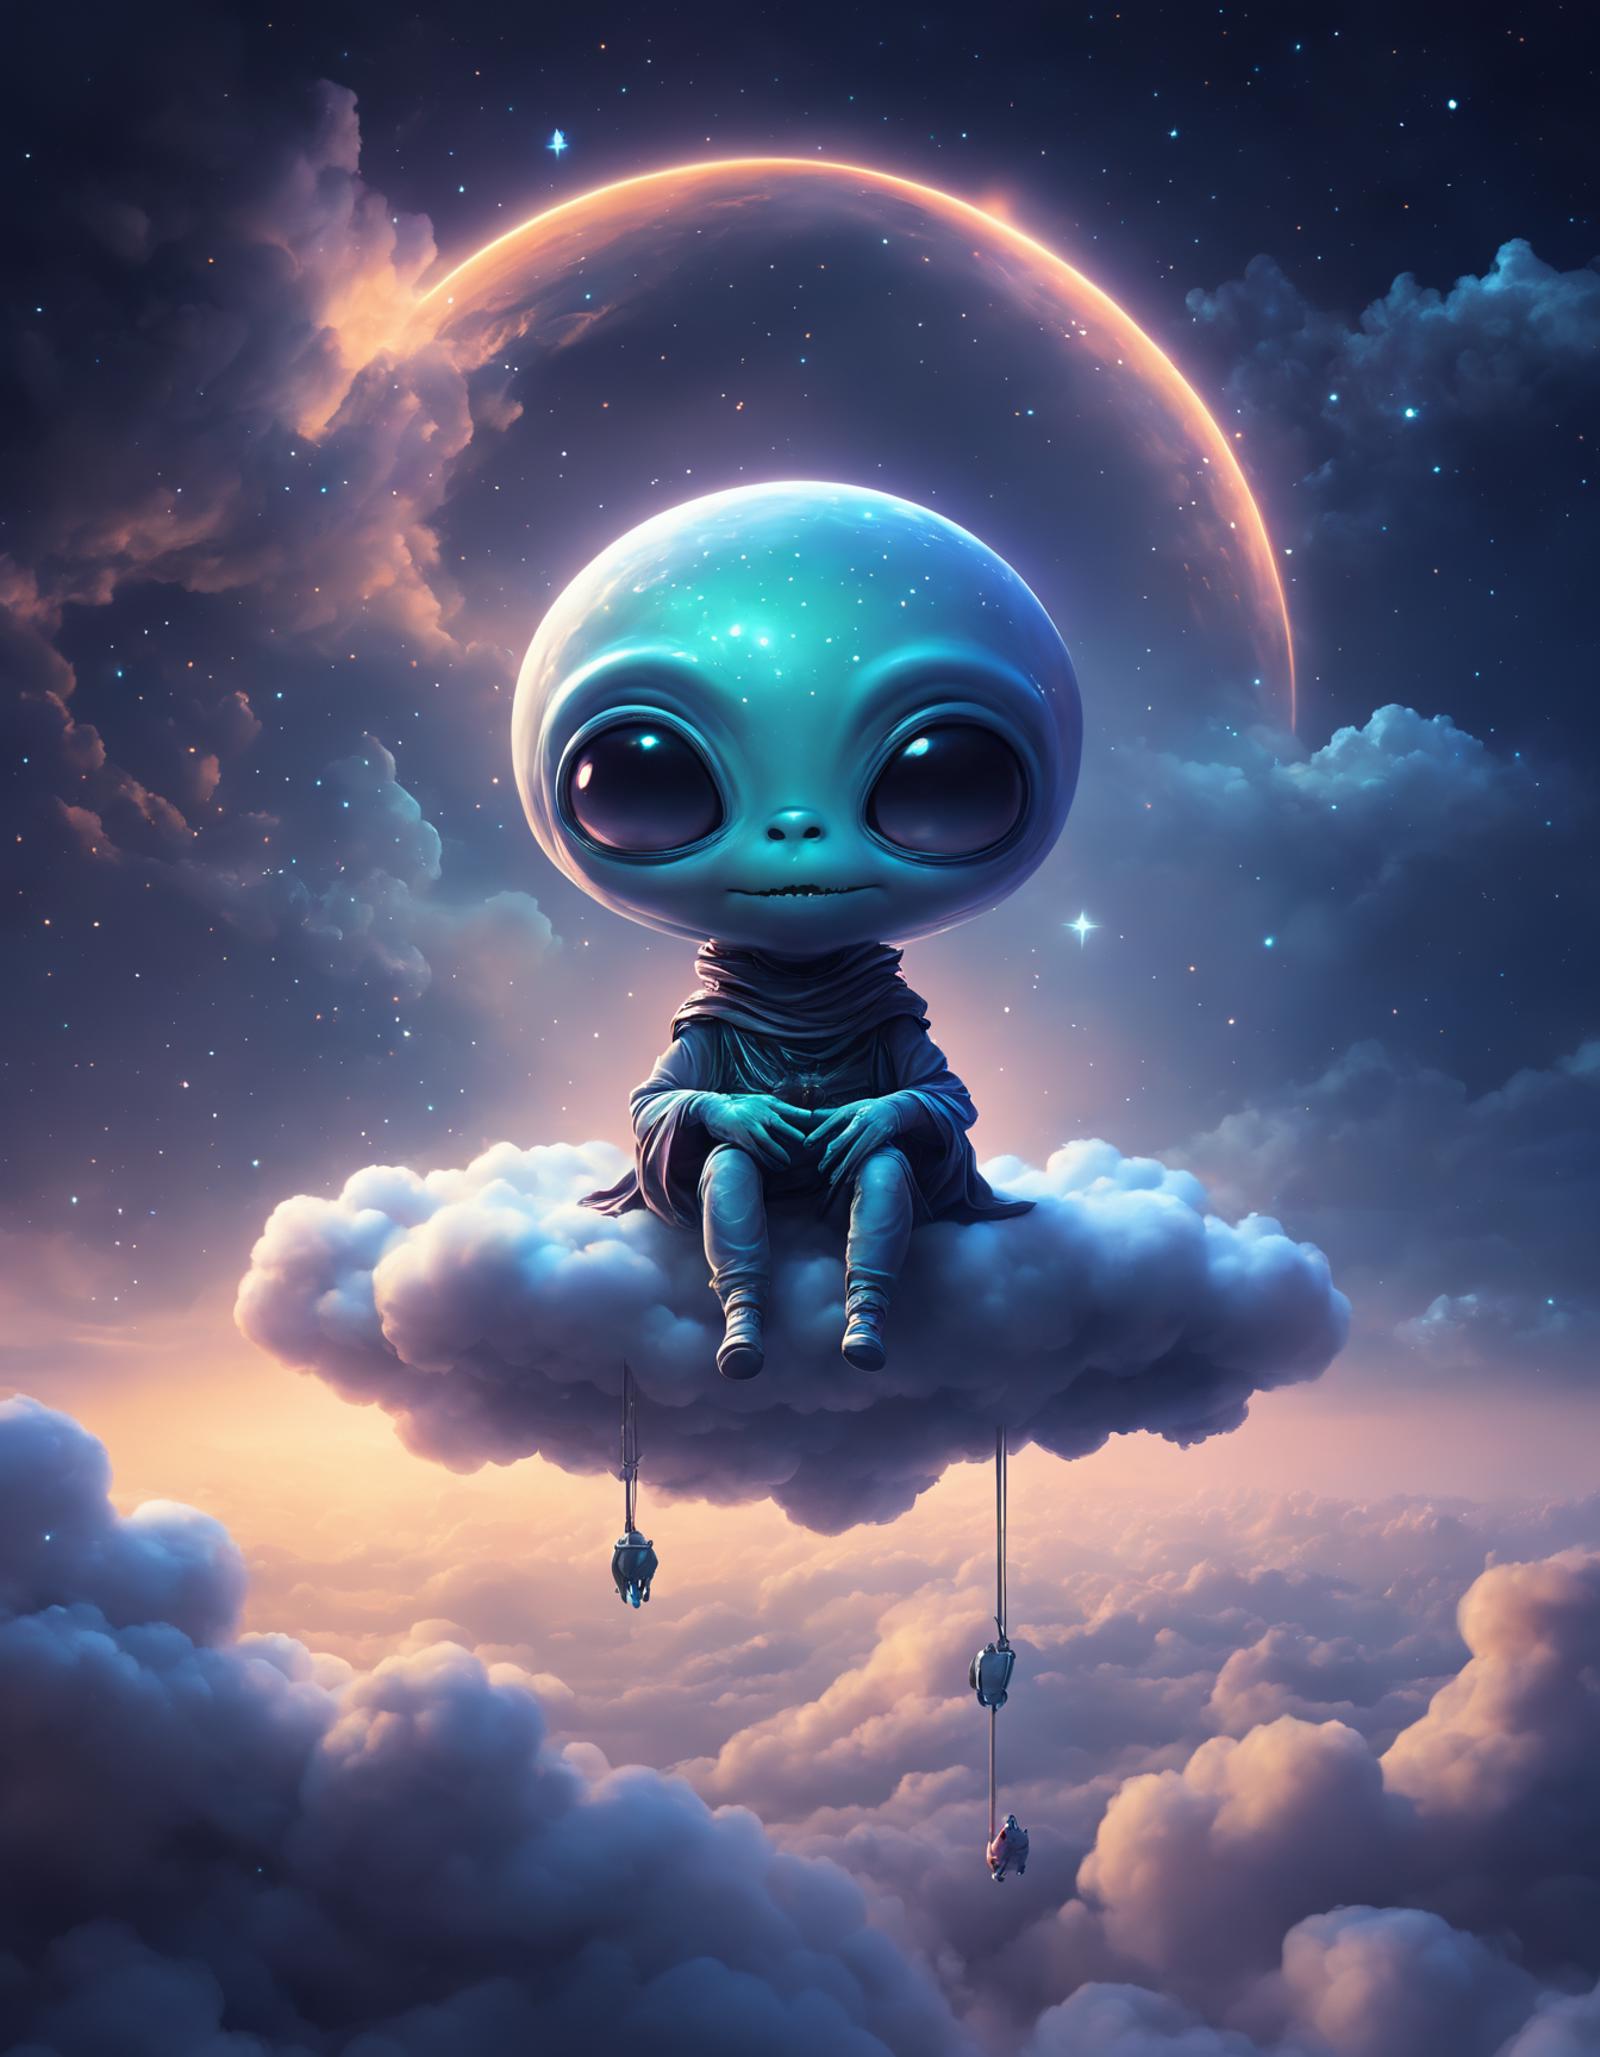 A cute alien sitting on a cloud with a moon in the background.